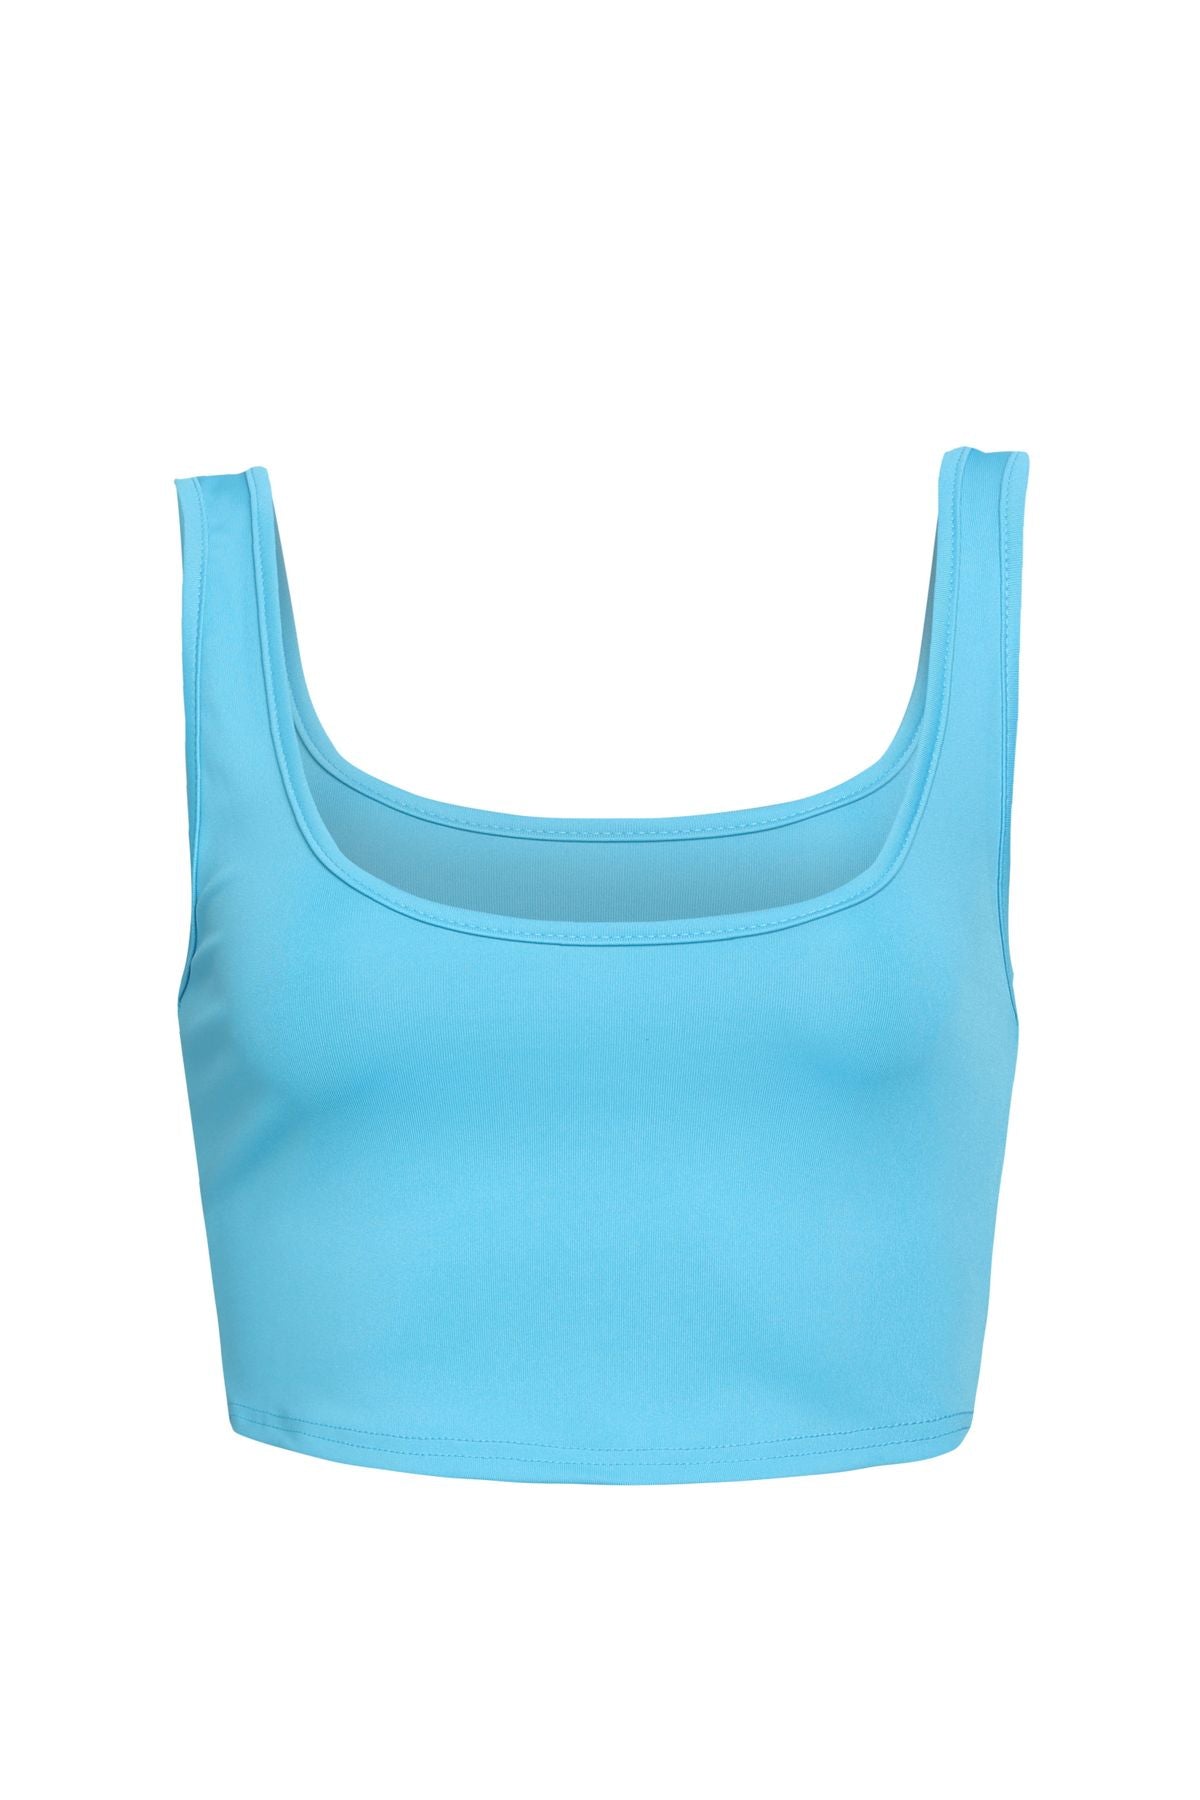 Thick Strap Bustier Turquoise